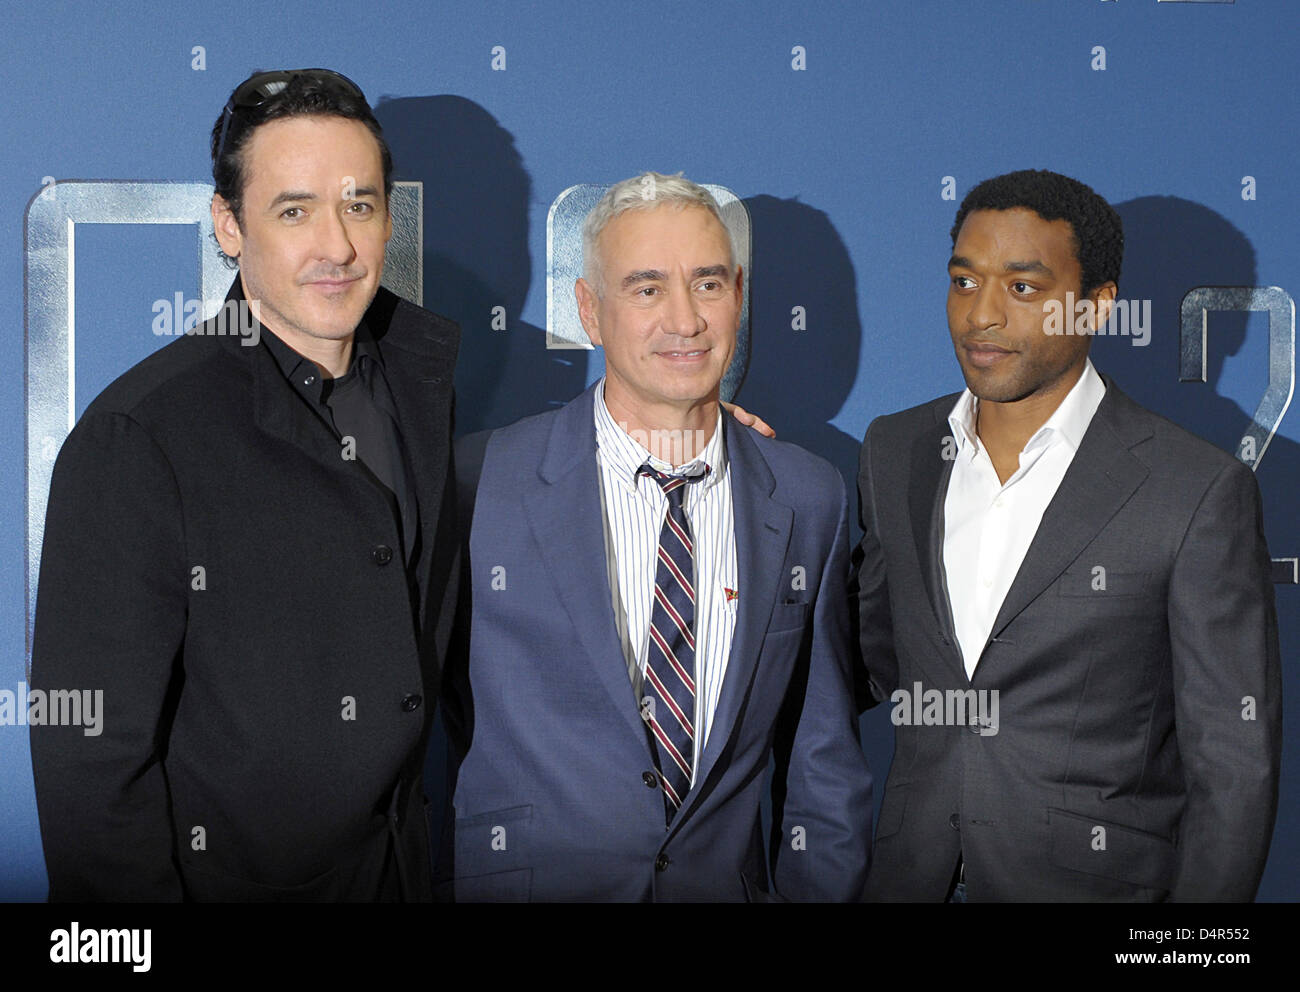 Director Roland Emmerich (C) and actors John Cusack (L) and Chiwetel Ejiofor pose for photographers during a photo call promoting the movie ?2012? in Berlin, Germany, 28 September 2009. The film will be in German cinemas from 12 November 2009 on. Photo: SOEREN STACHE Stock Photo